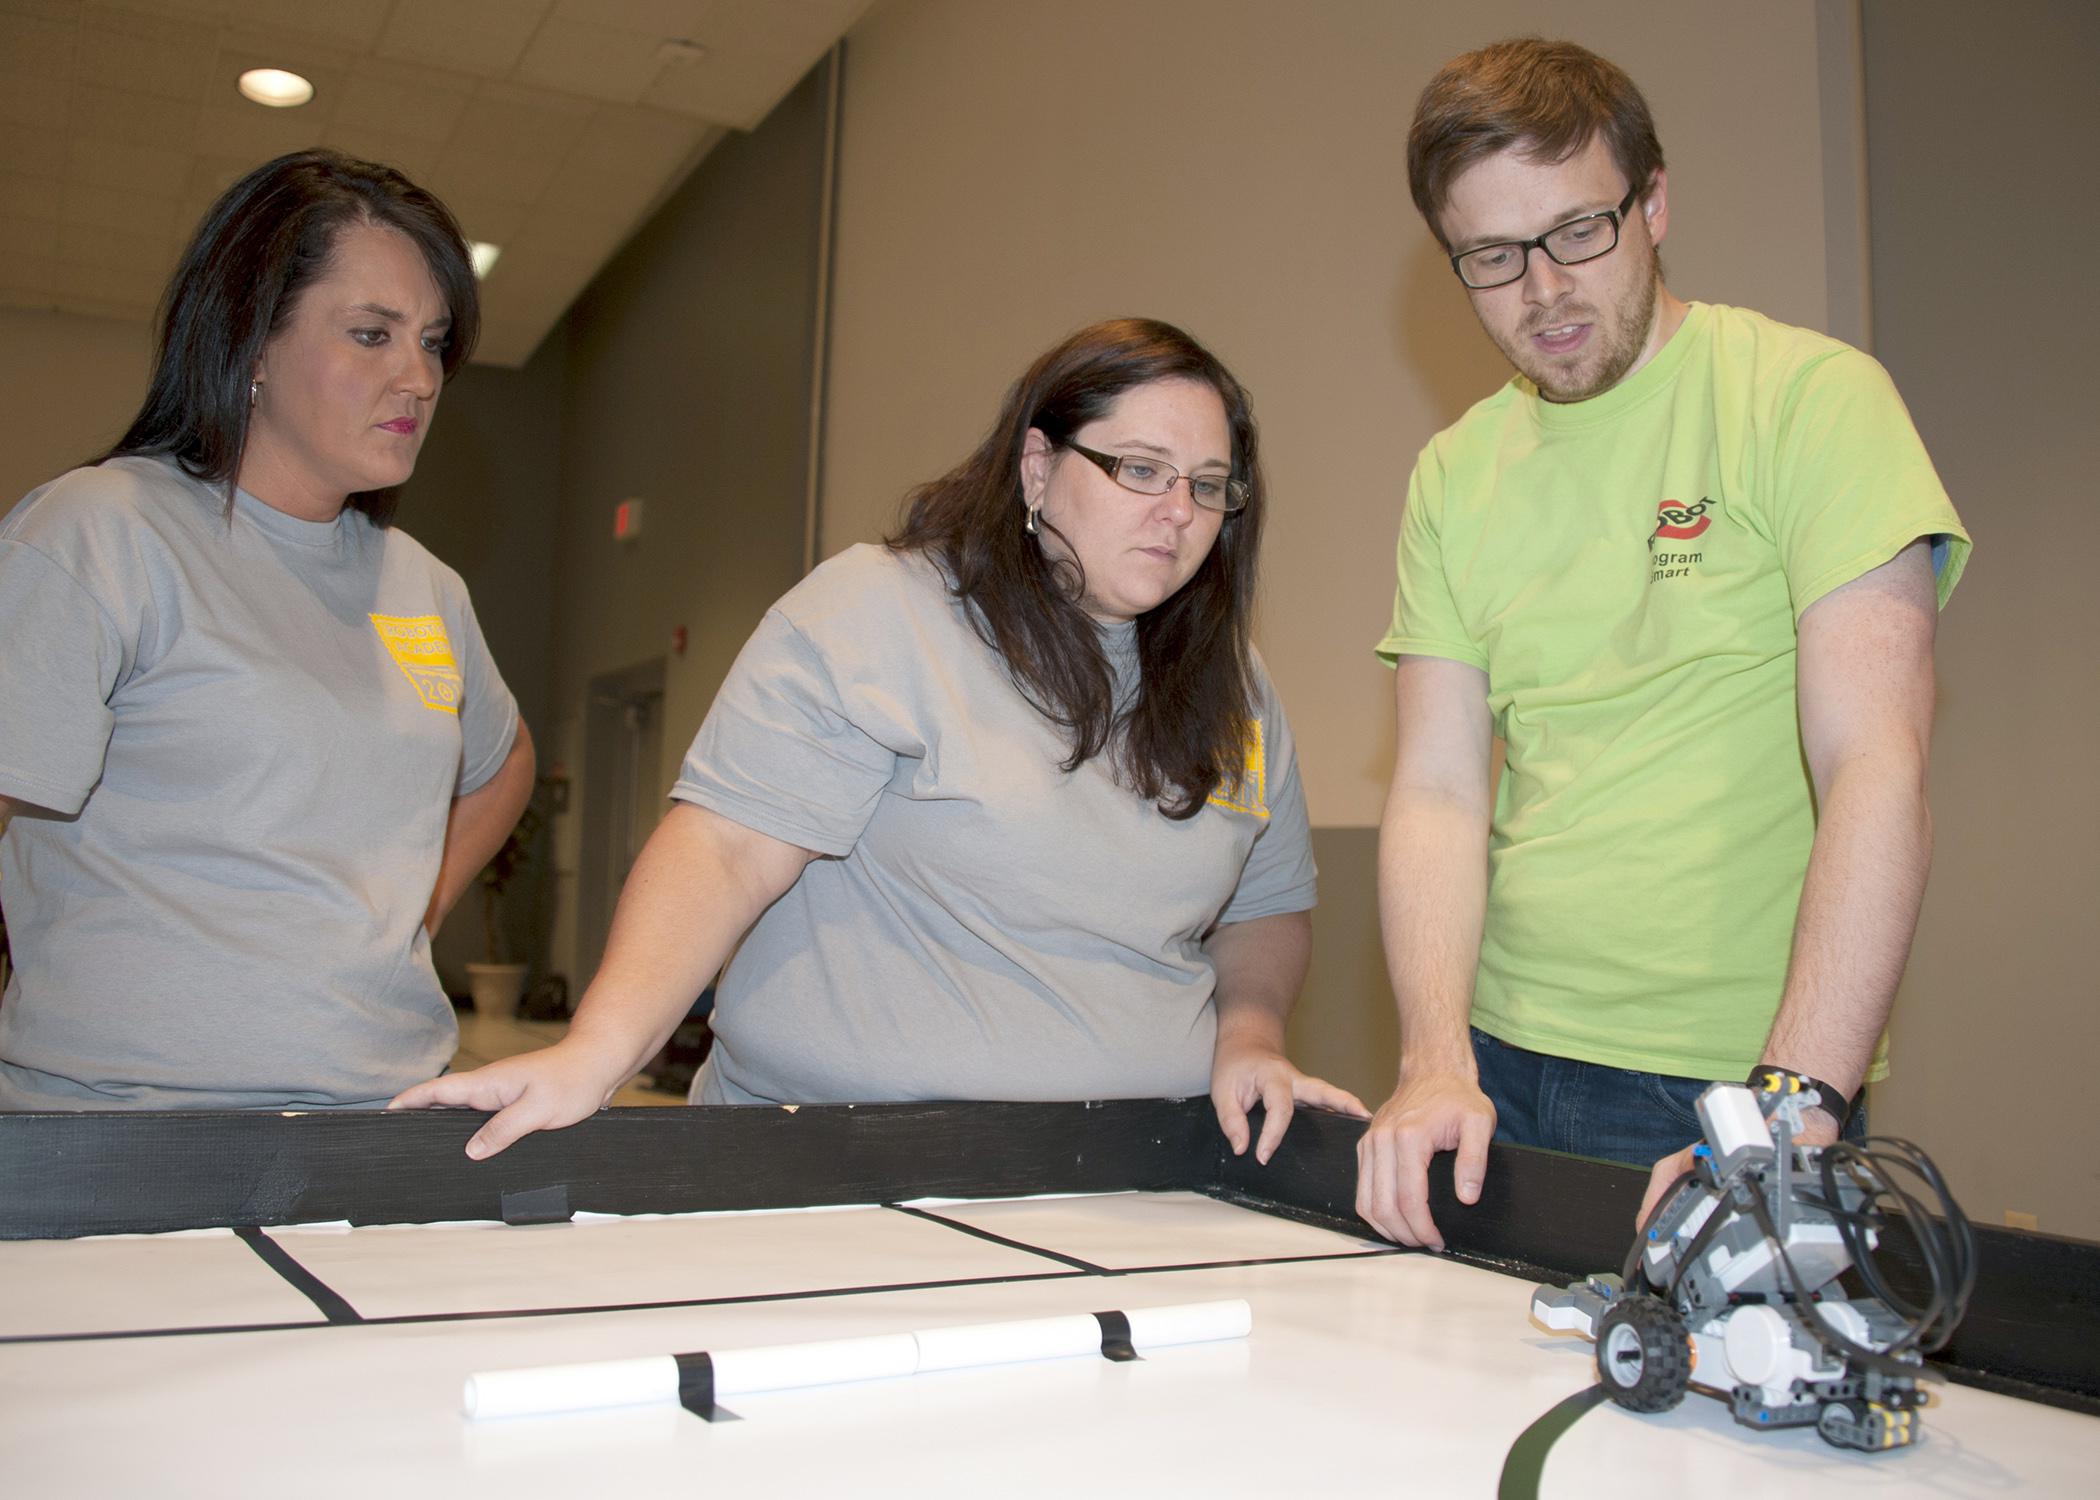 Betsy Padgett, Holmes County Extension agent, and Christina Meriwether, Leflore County Extension agent, learn how to program robots at Mississippi State University's 4-H Robotics Academy on Aug. 13, 2013. (Photo by MSU Ag Communications/Kat Lawrence)